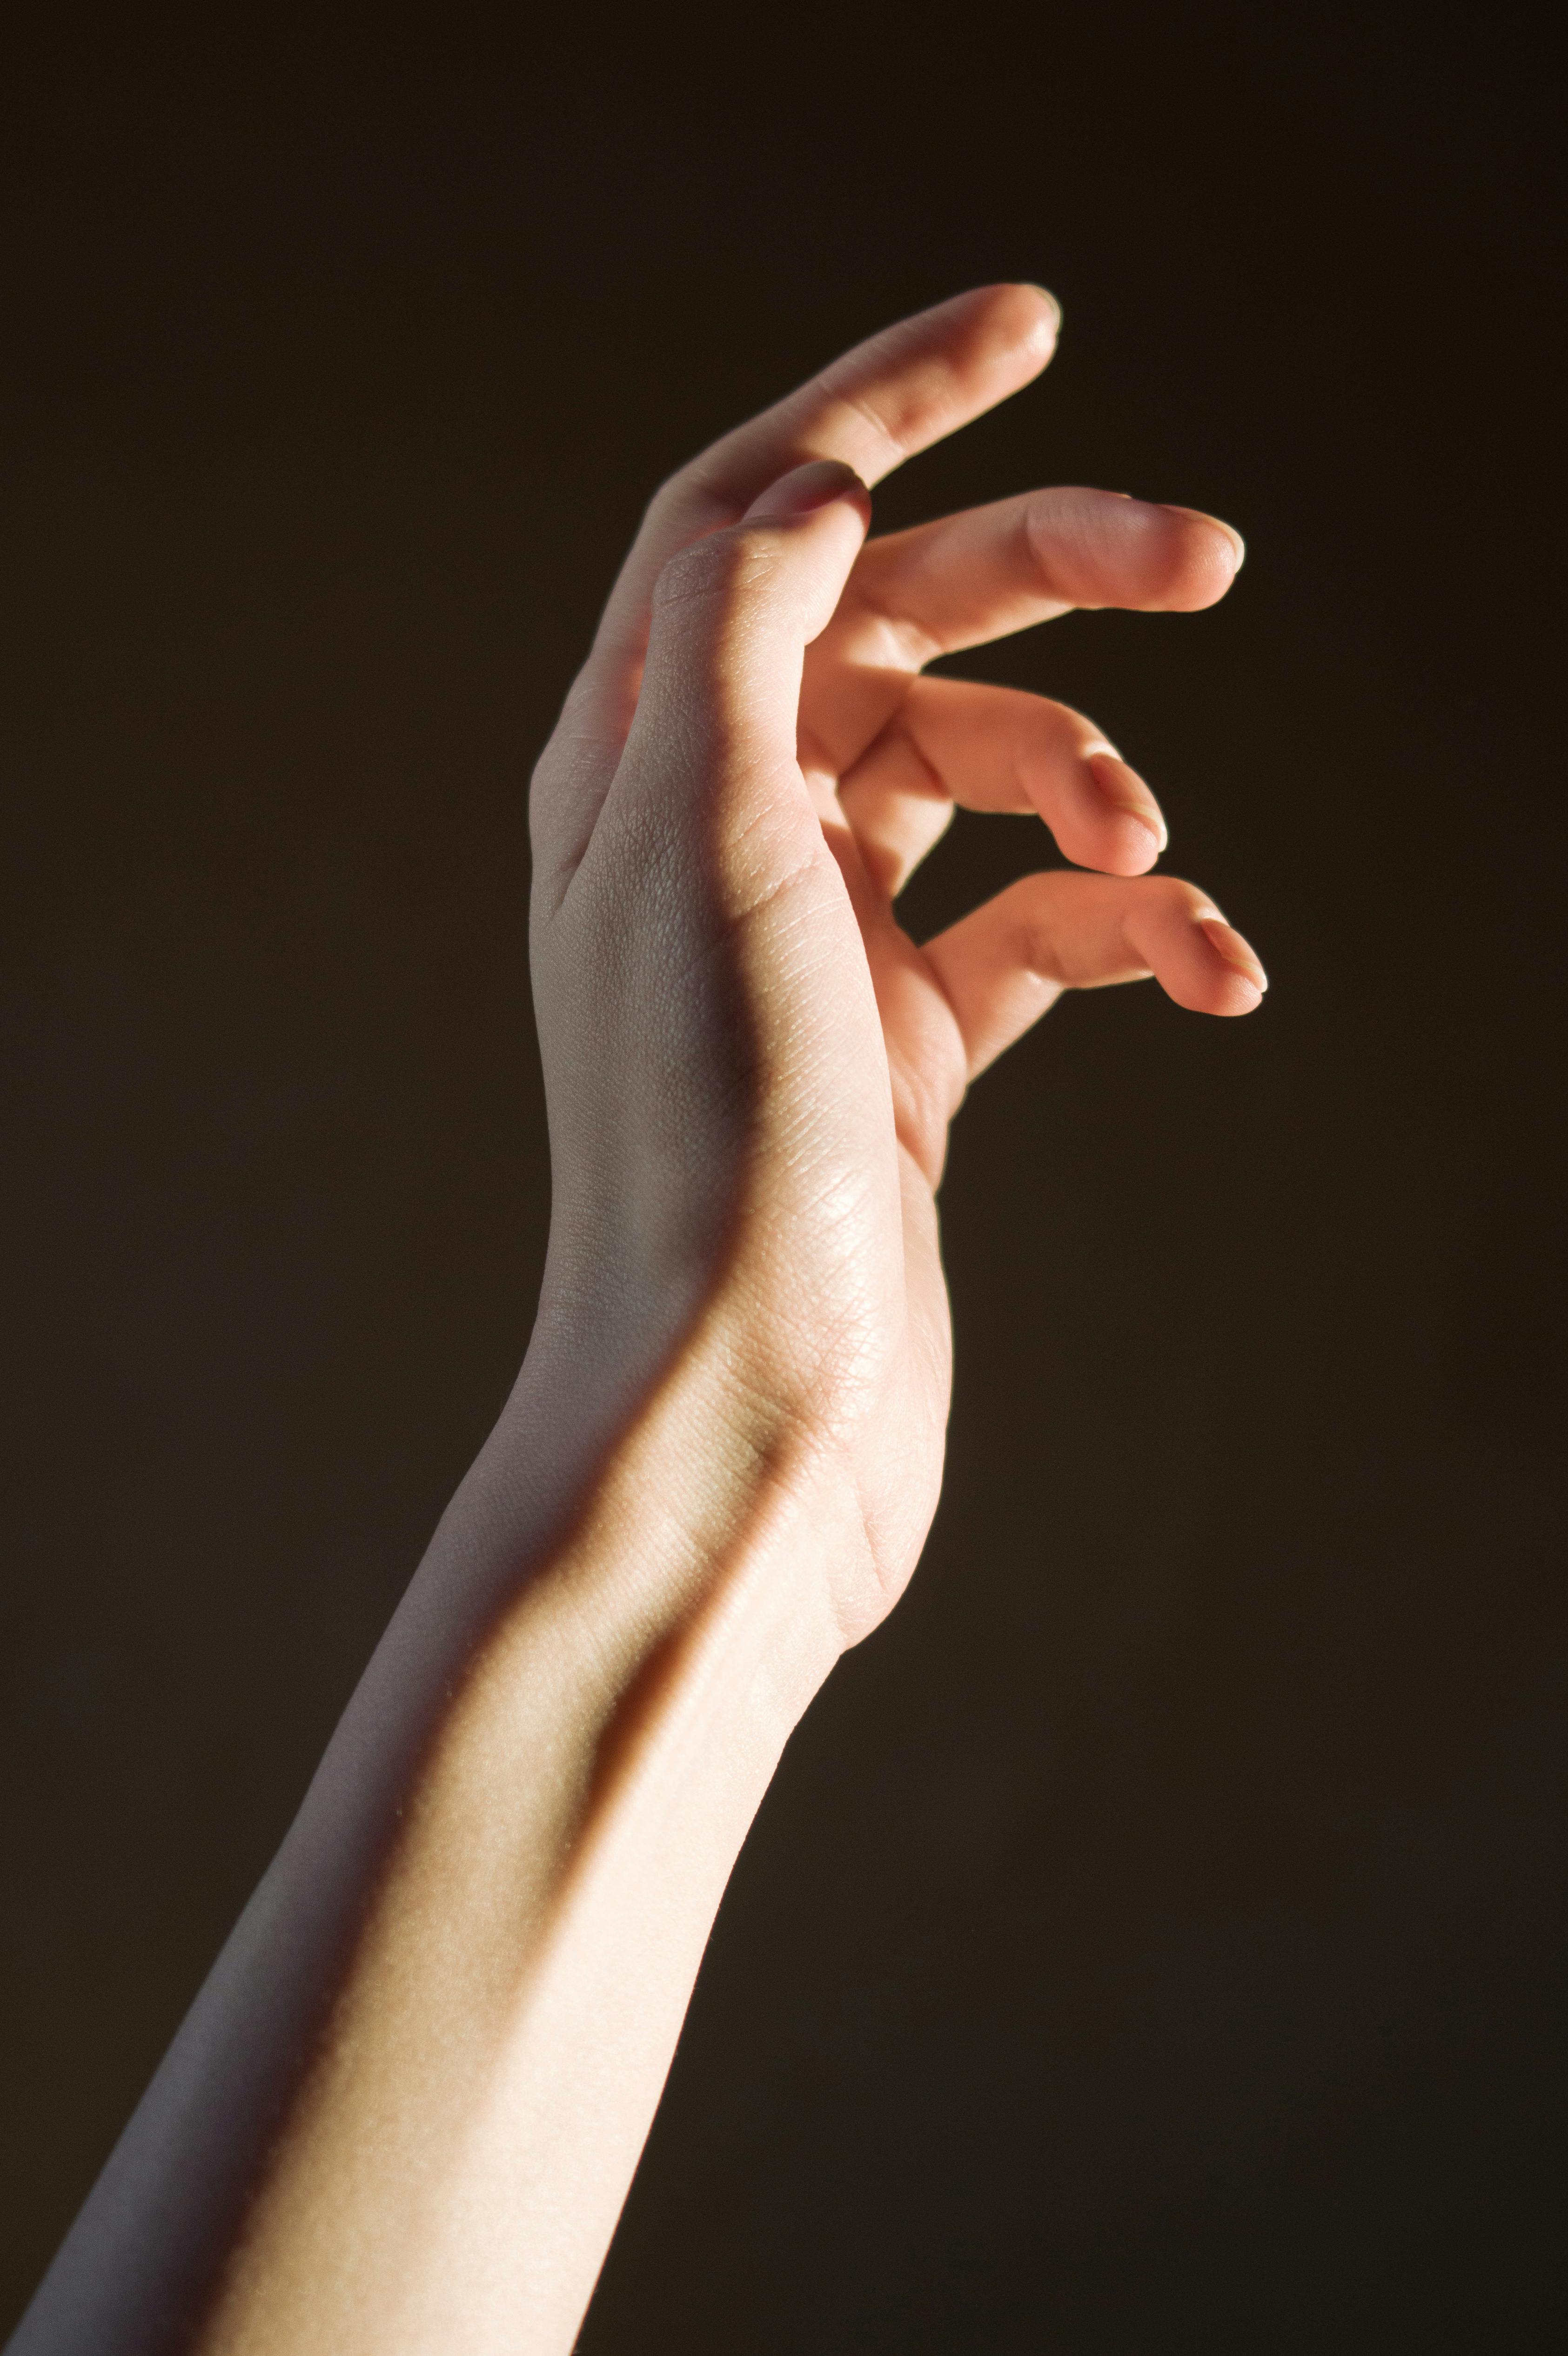 Person's Hand On Black Background · Free Stock Photo